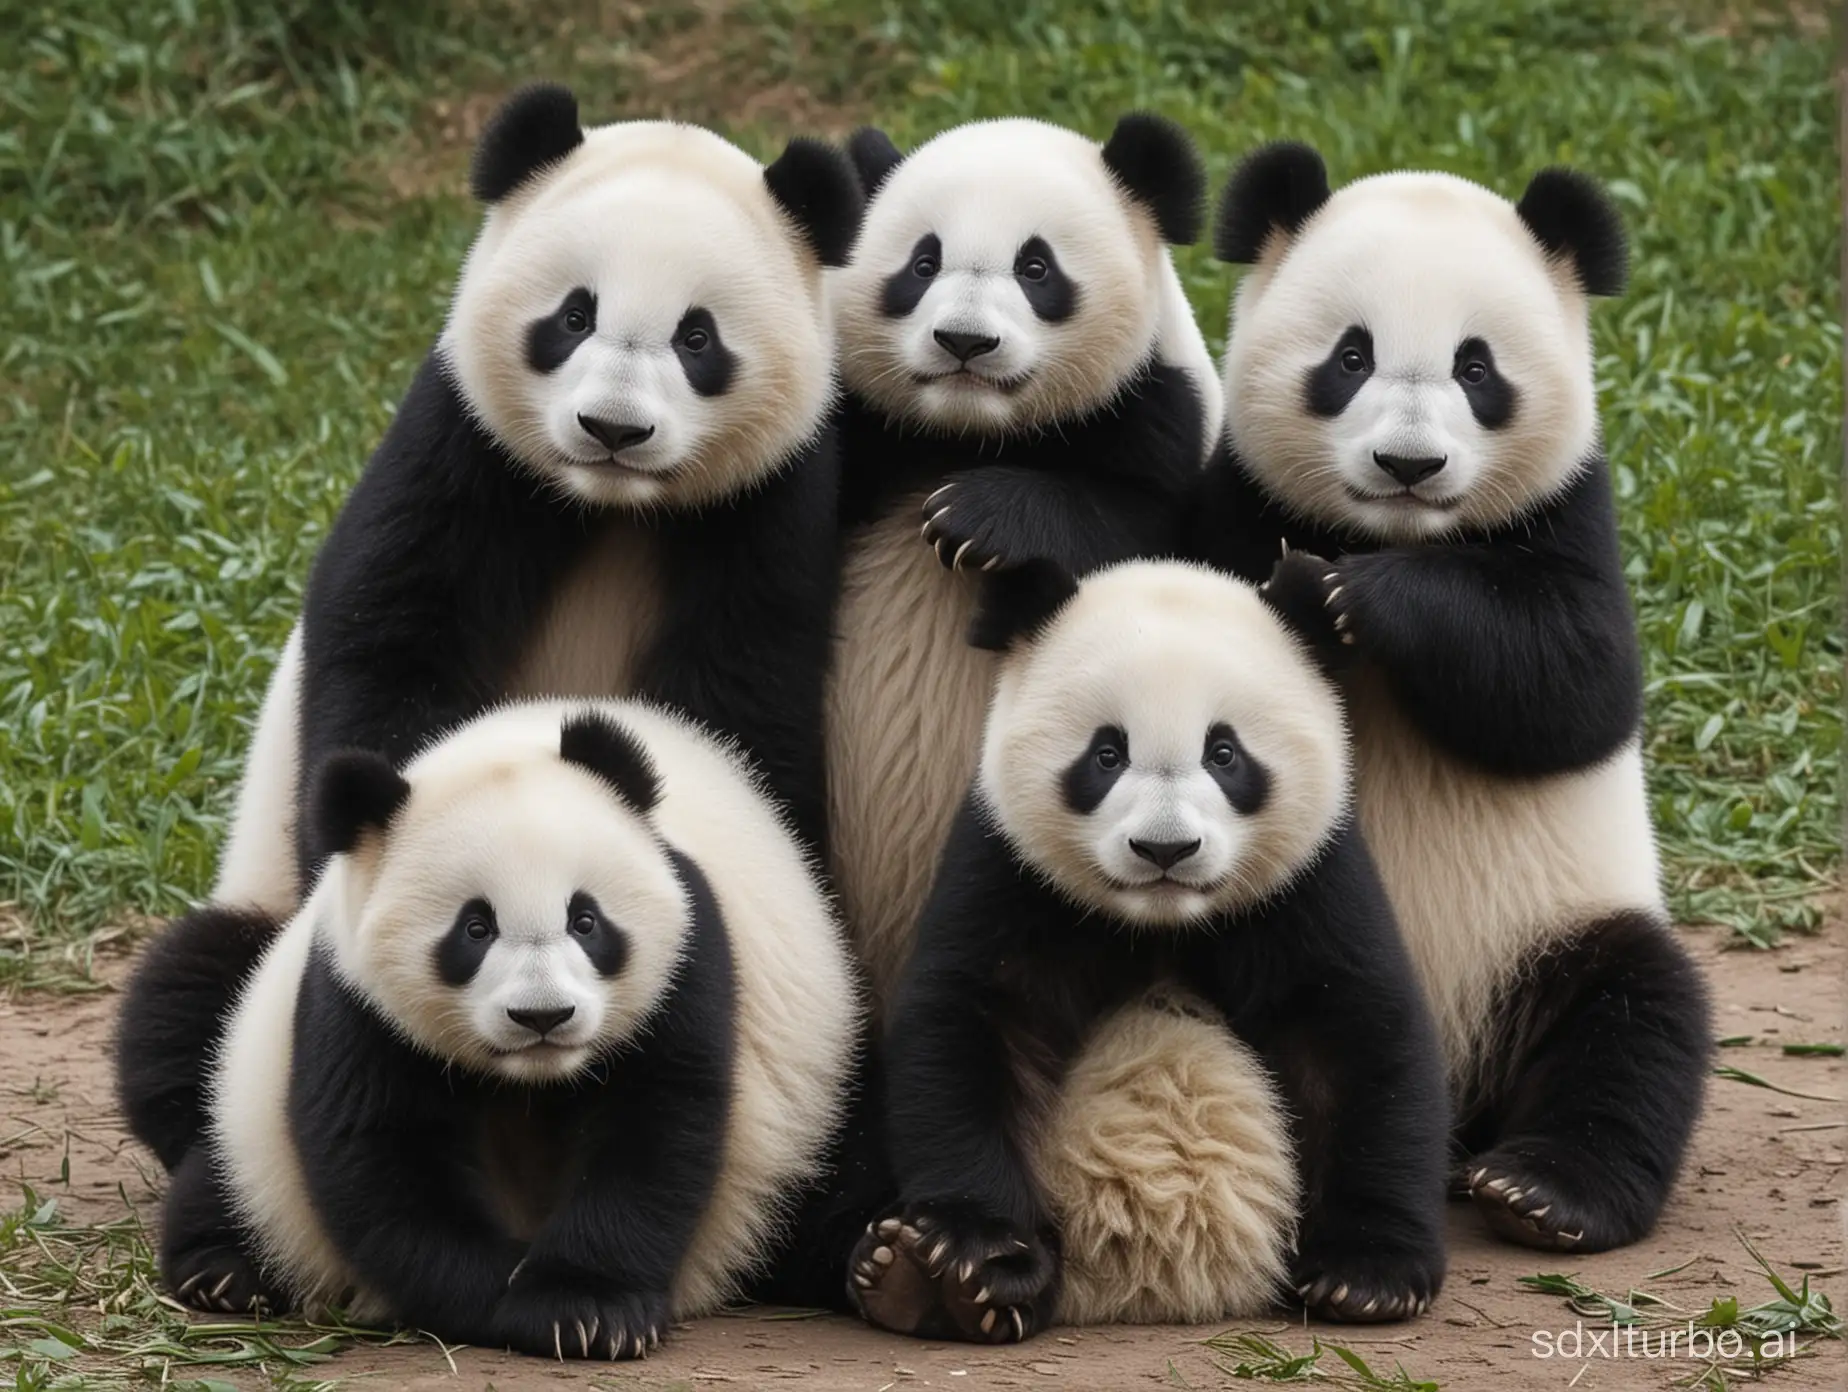 Adorable-Pandas-Playing-with-Bamboo-in-a-Bamboo-Forest